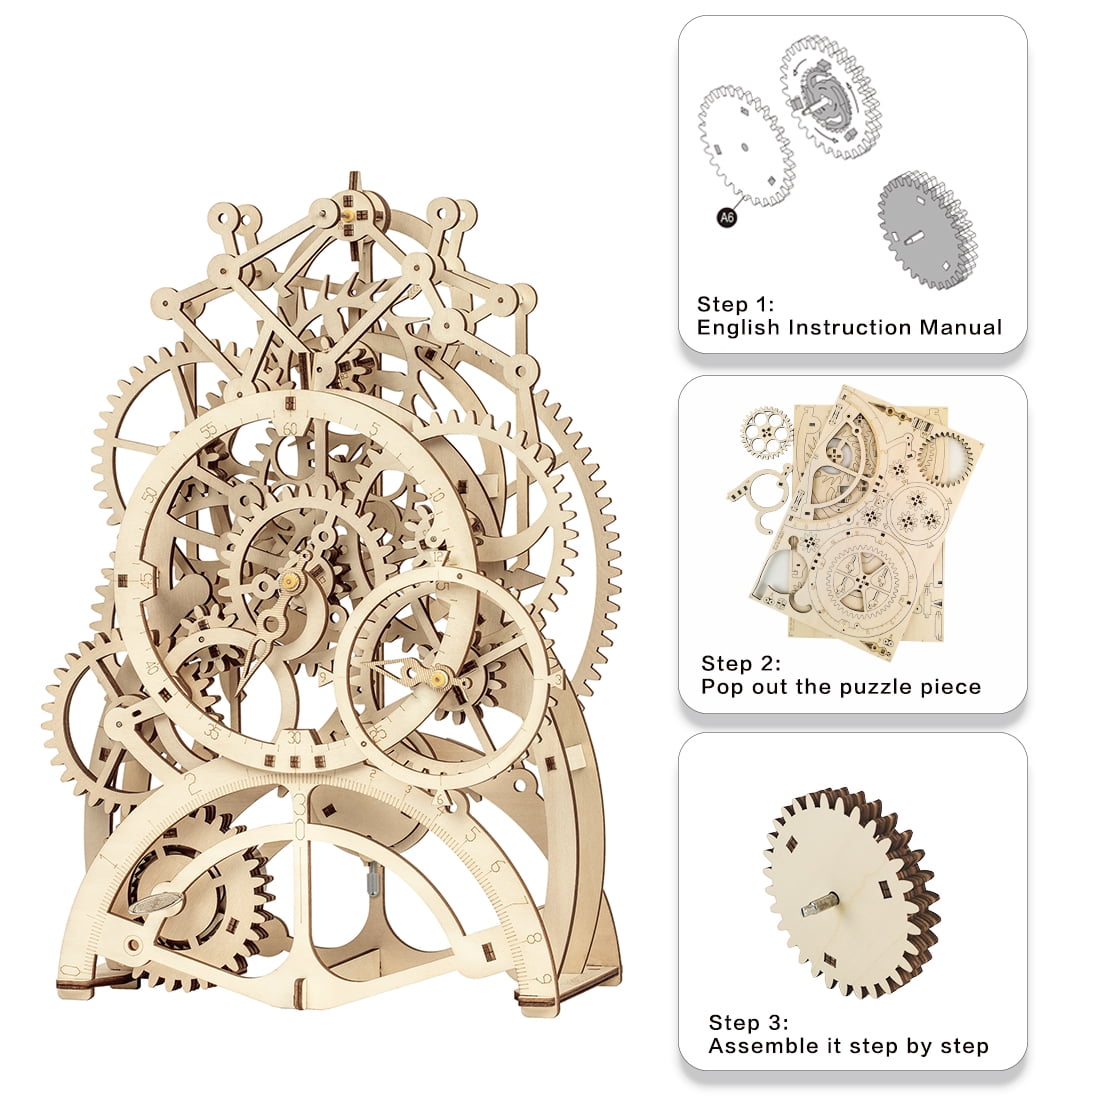  ROKR 3D Puzzle LK602 for Adults, Classic Printing Press Wooden  Puzzles Model Building Kits, DIY Wood Crafts Cool Toys for Kids Birthday  Gifts,Collage Aesthetic, Art Hobbies for Men Women : Toys